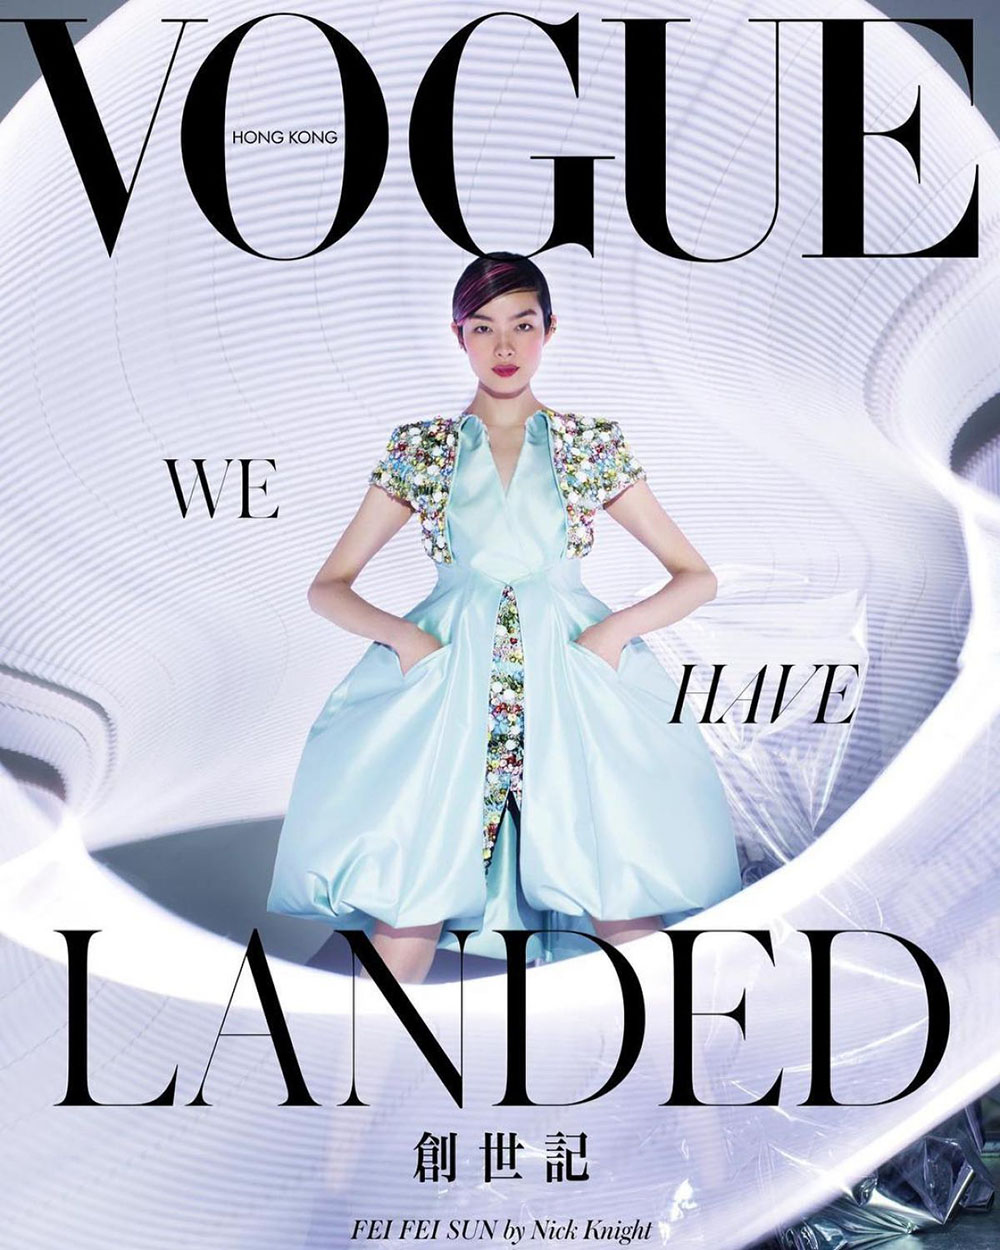 Gigi Hadid and Fei Fei Sun cover Vogue Hong Kong March 2019 by Nick Knight